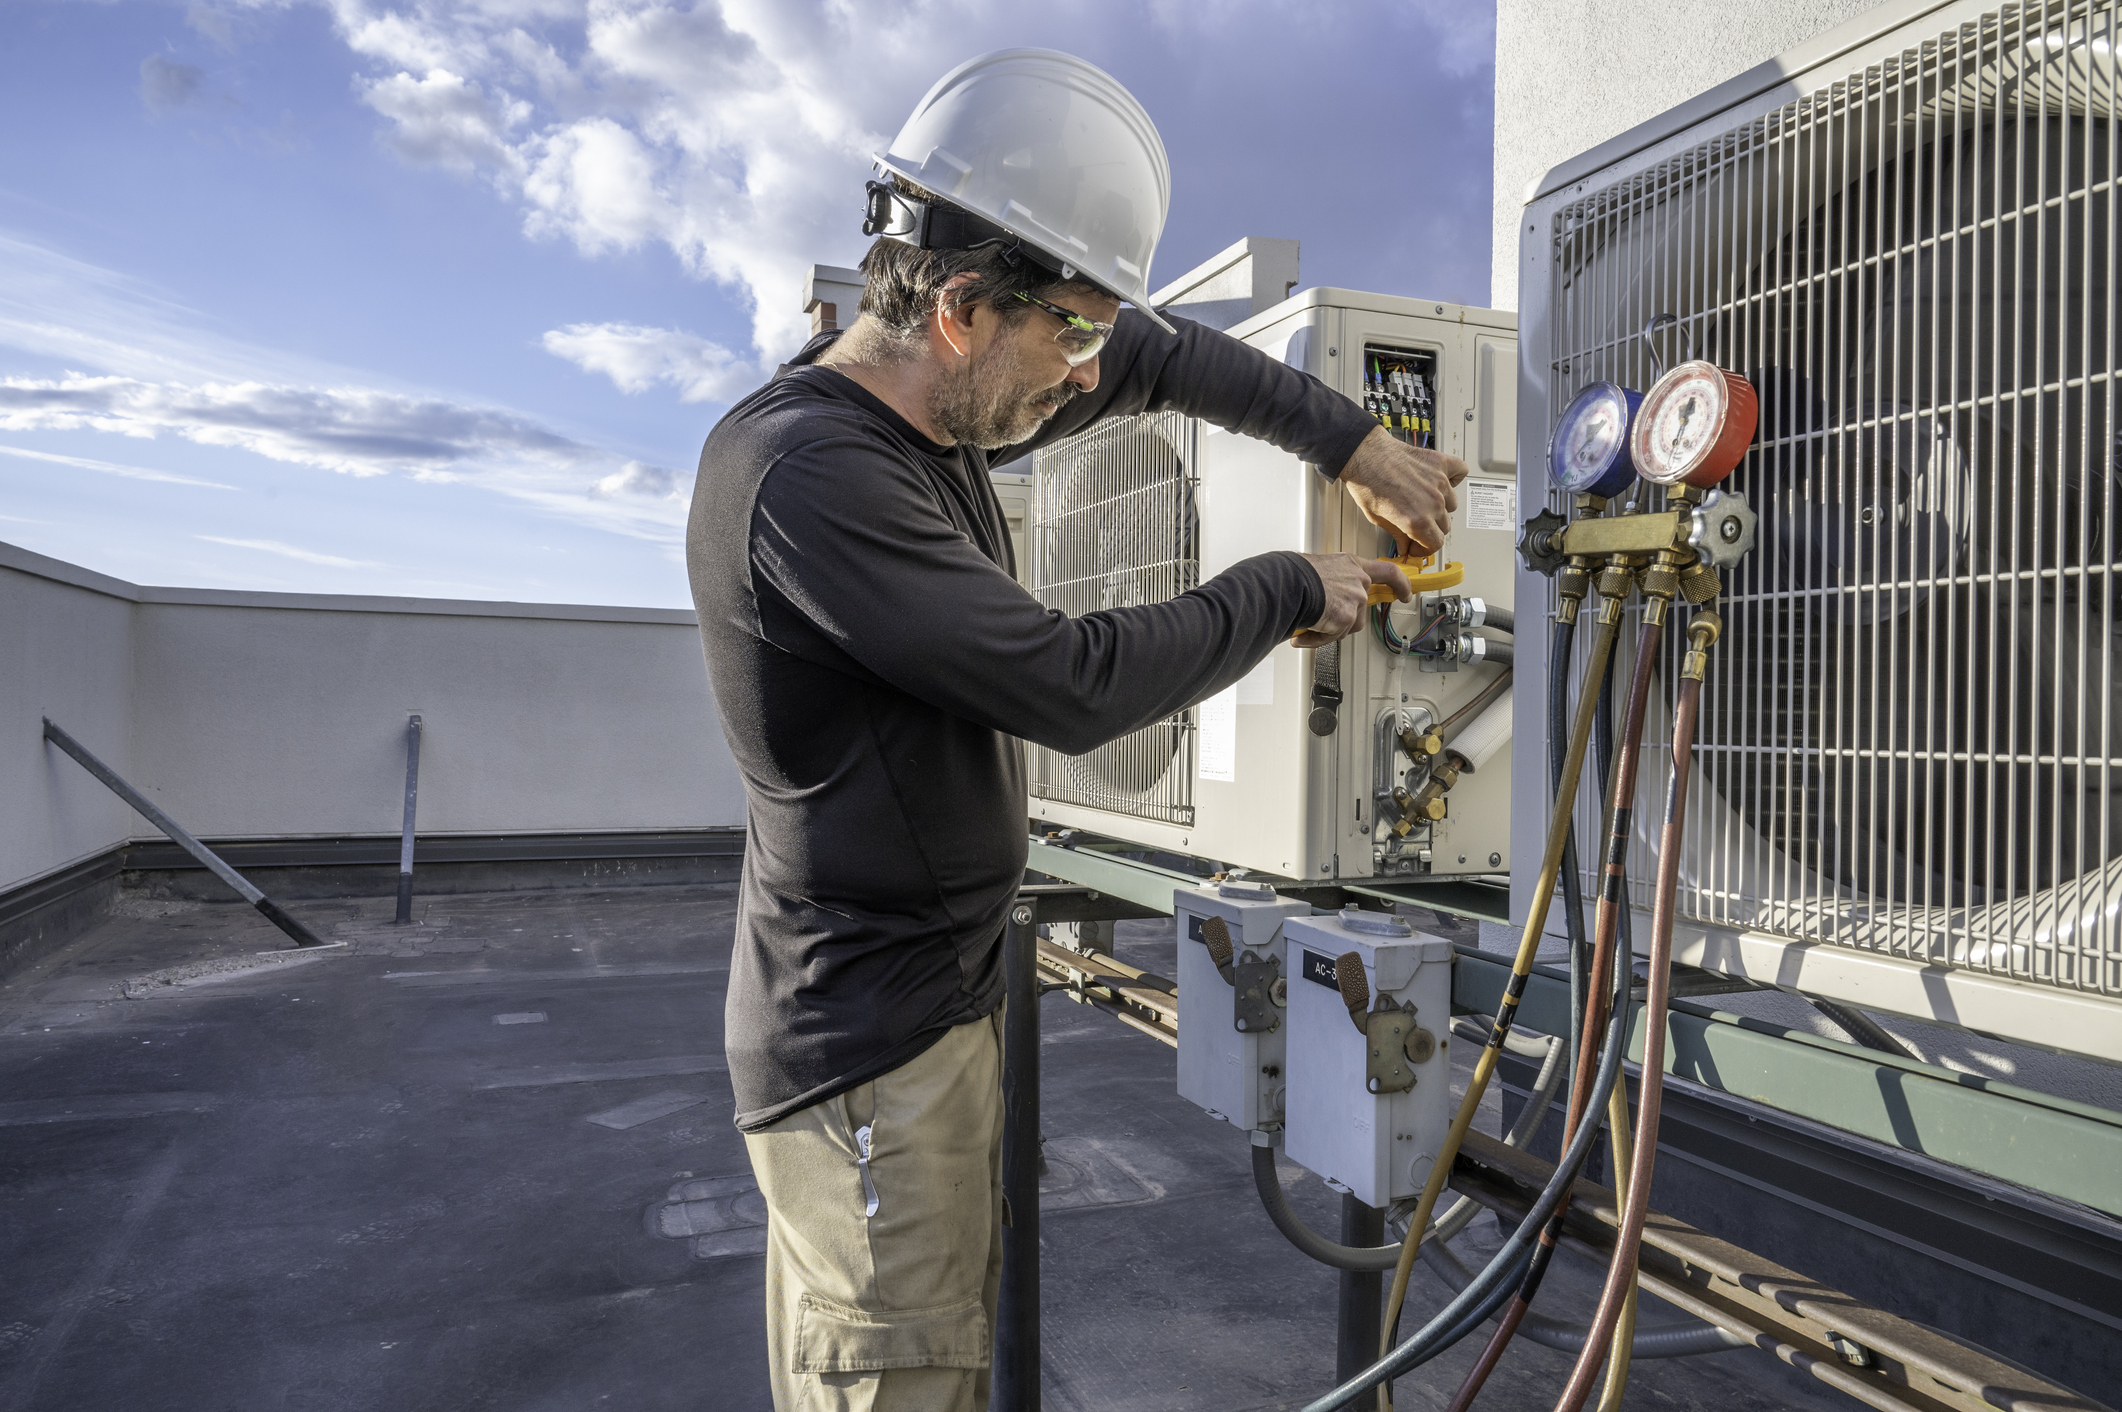 HVAC technician performing a service on a commercial AC unit